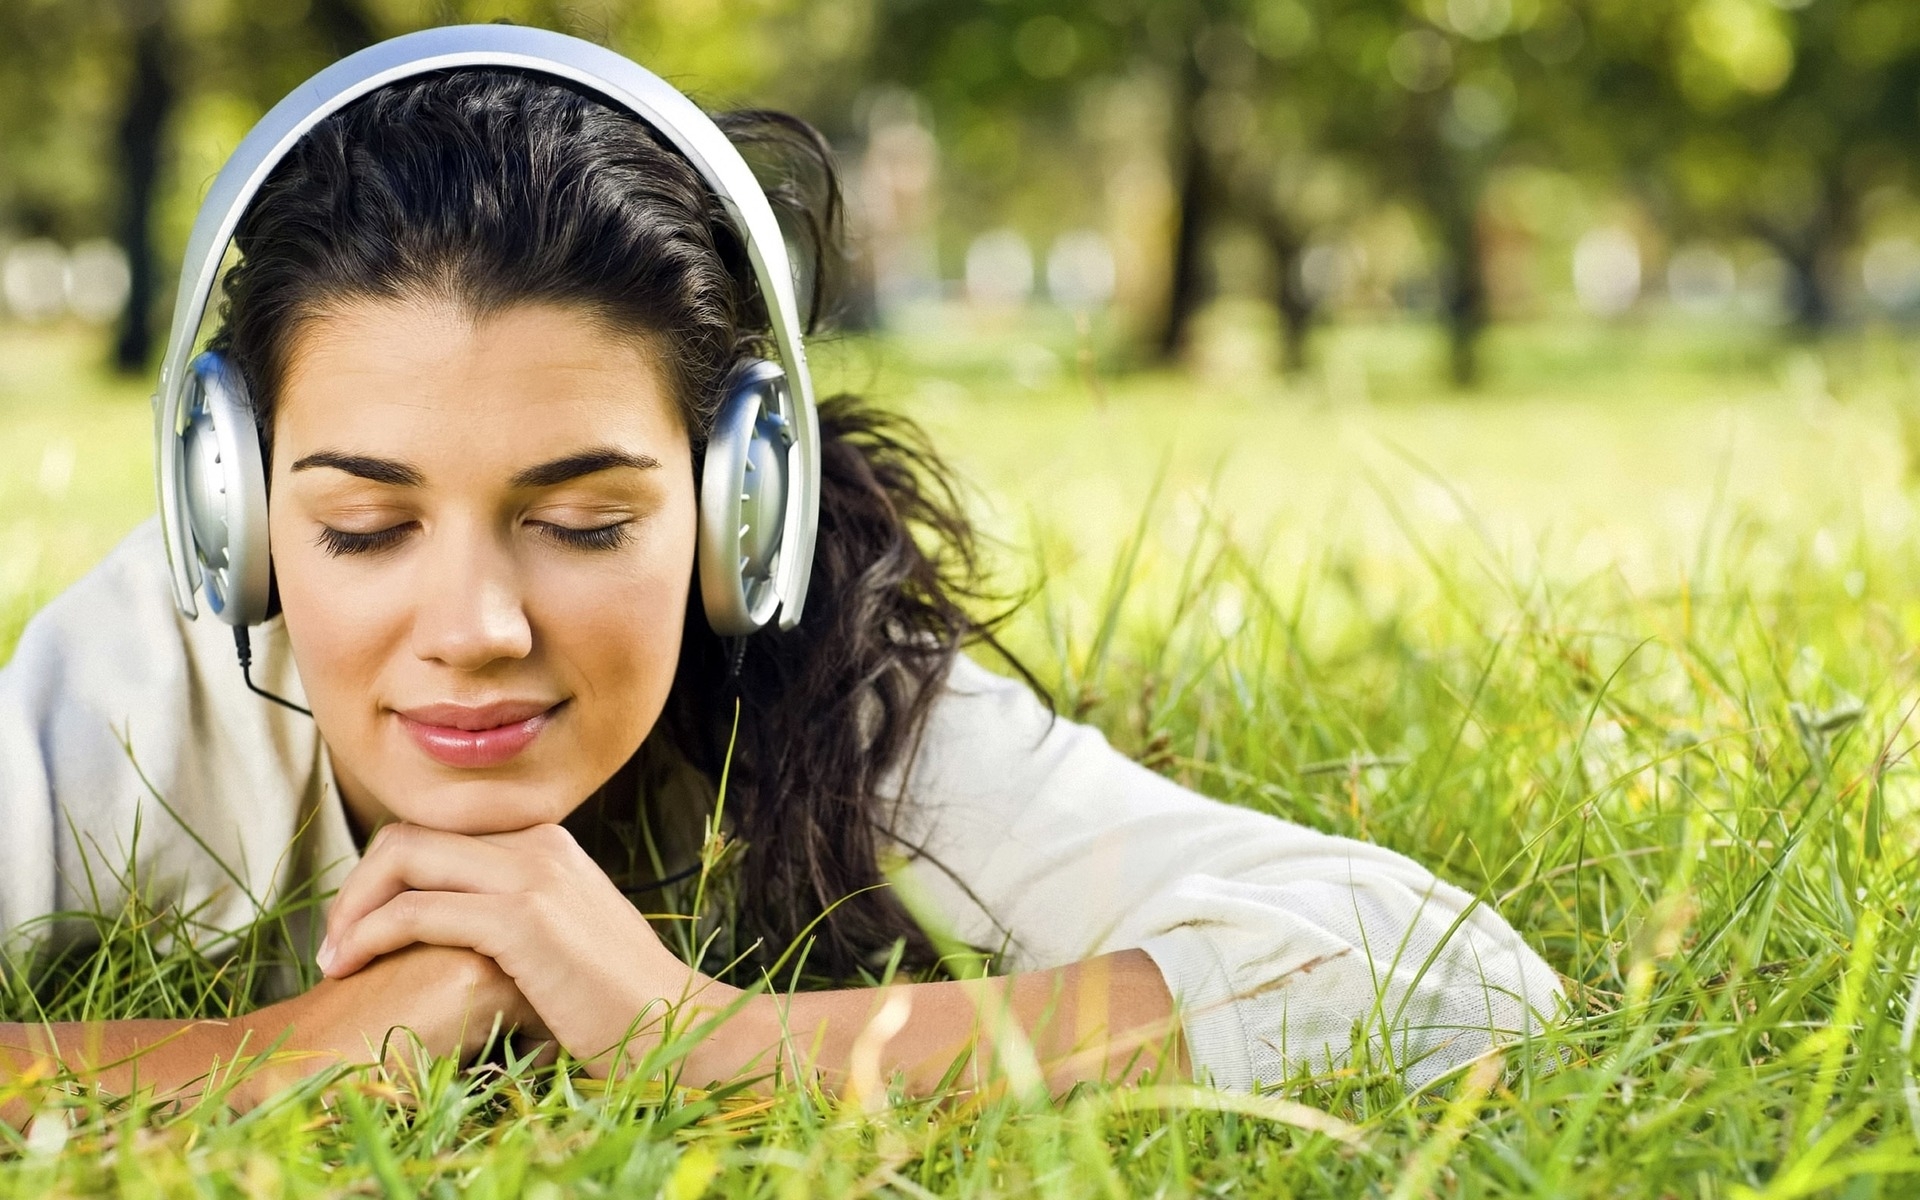 Girls_In_the_headphones_on_the_grass_025125_